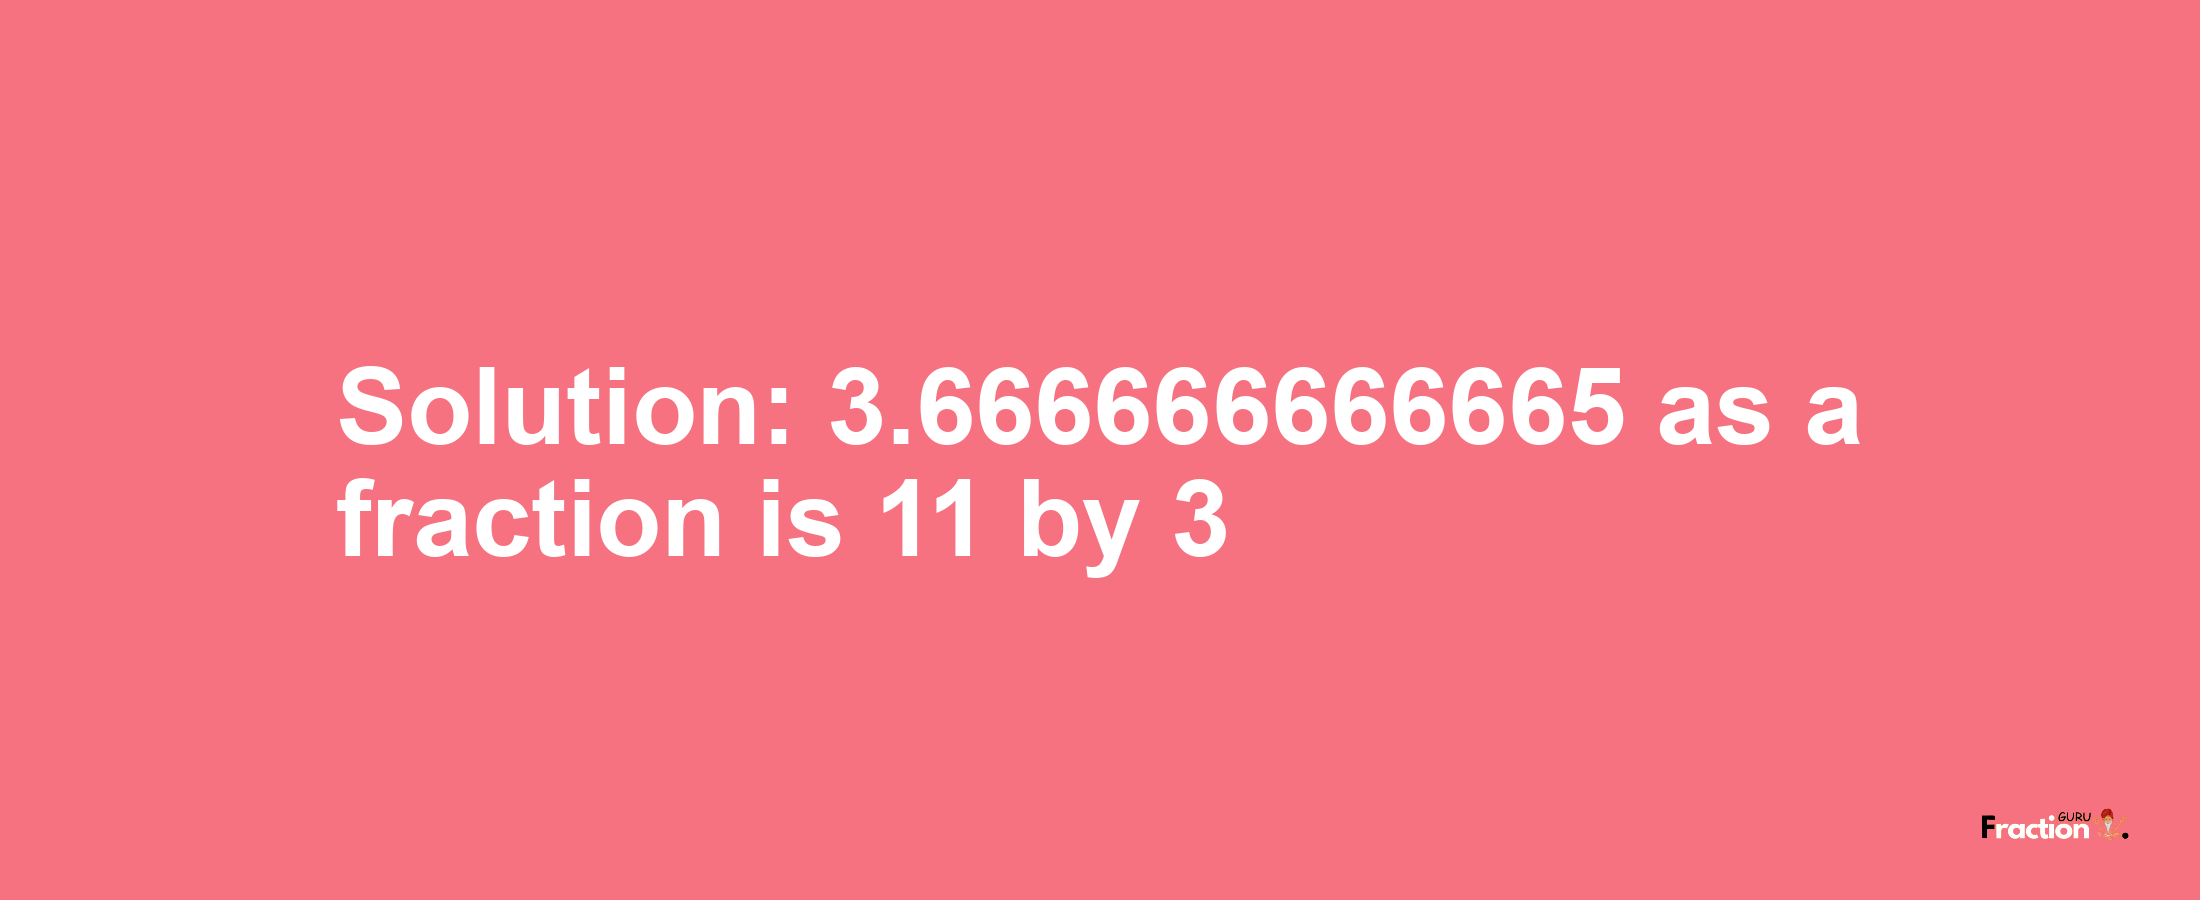 Solution:3.666666666665 as a fraction is 11/3